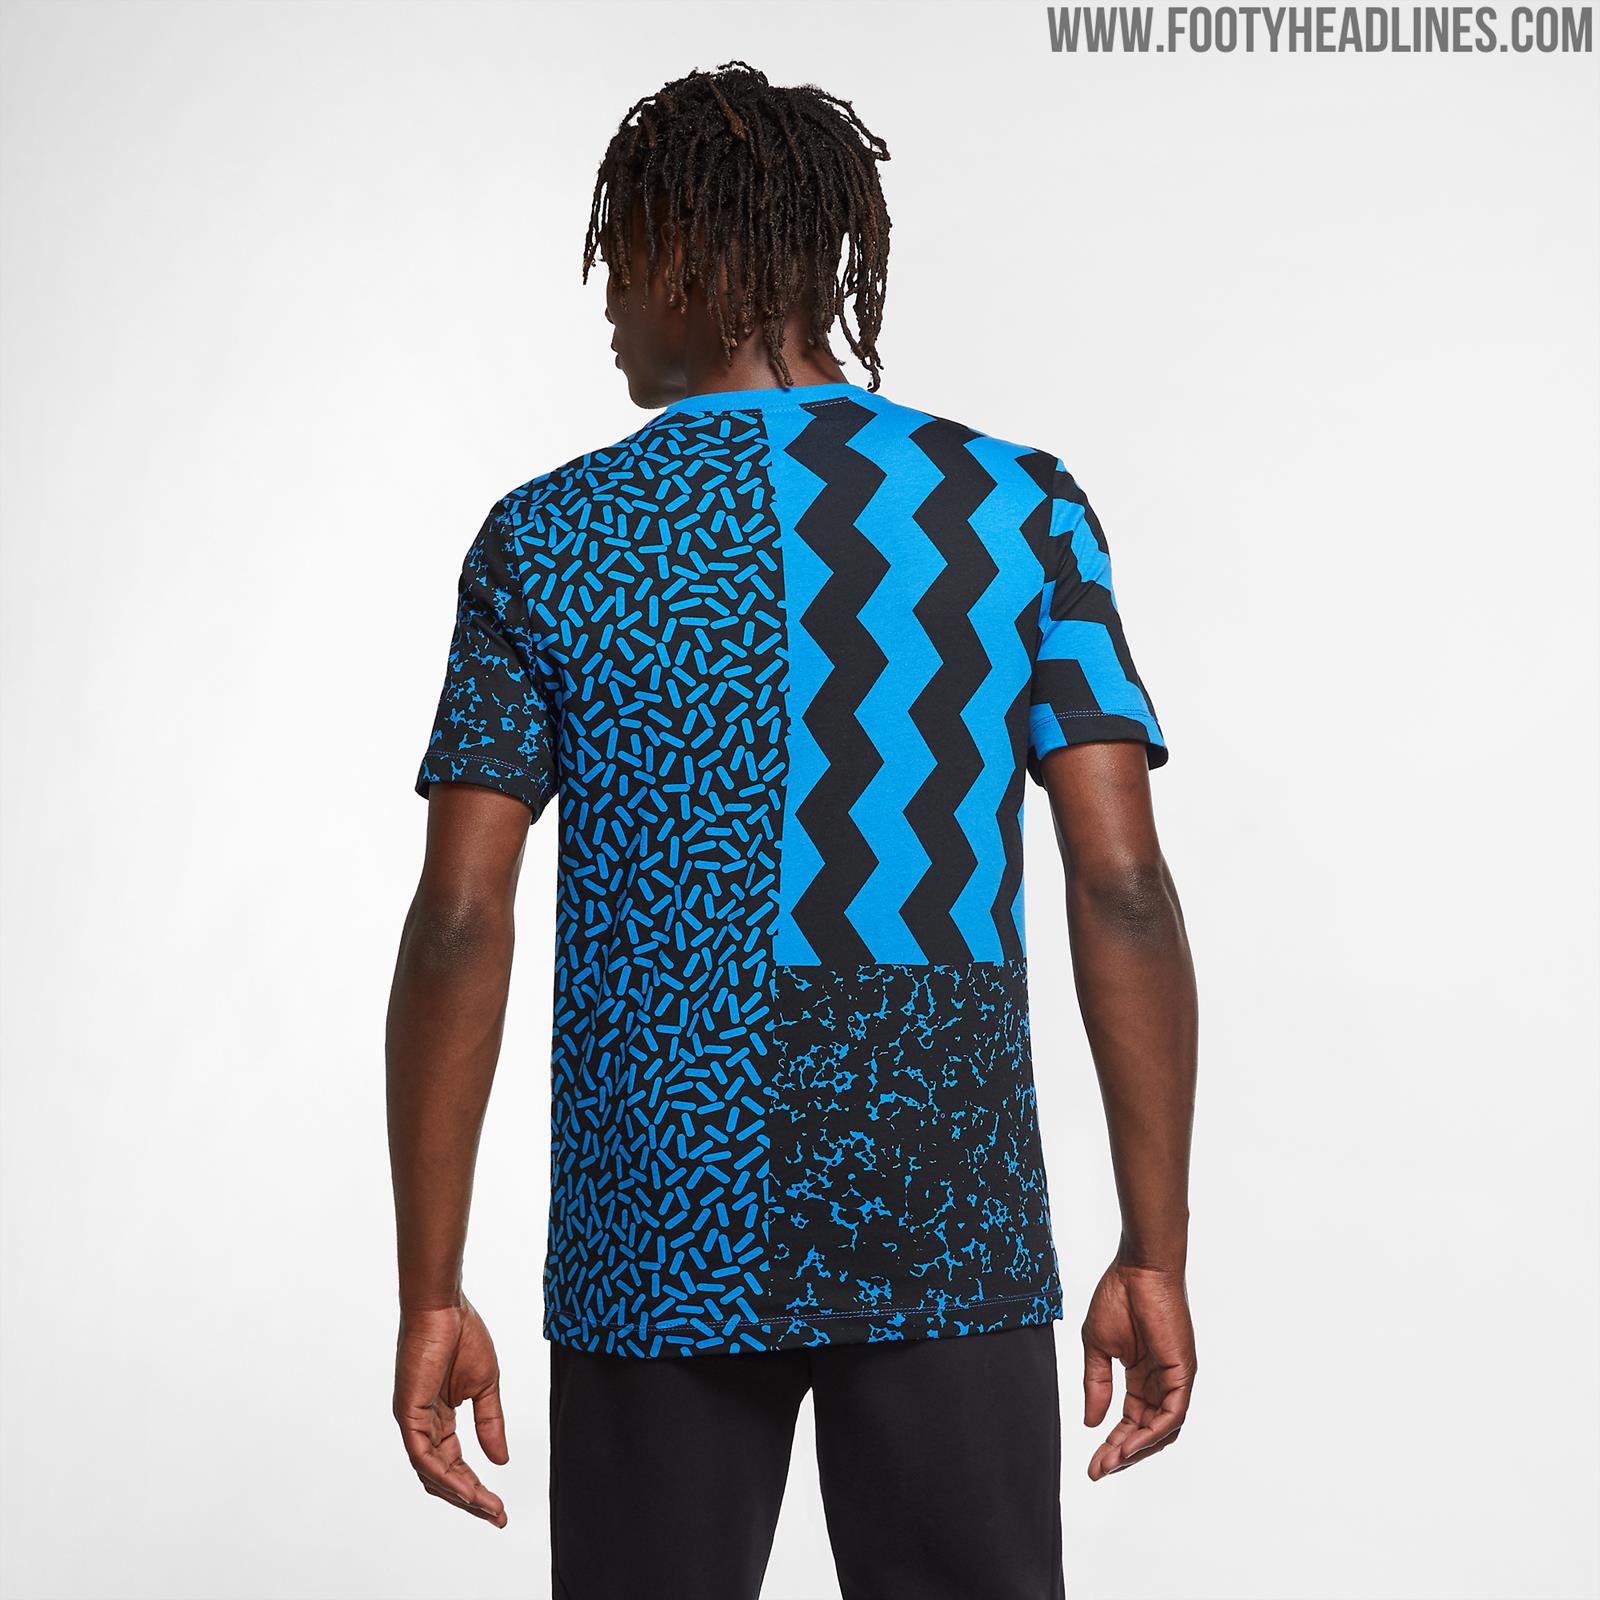 Outstanding Nike Inter 20-21 Collection Revealed - Footy Headlines